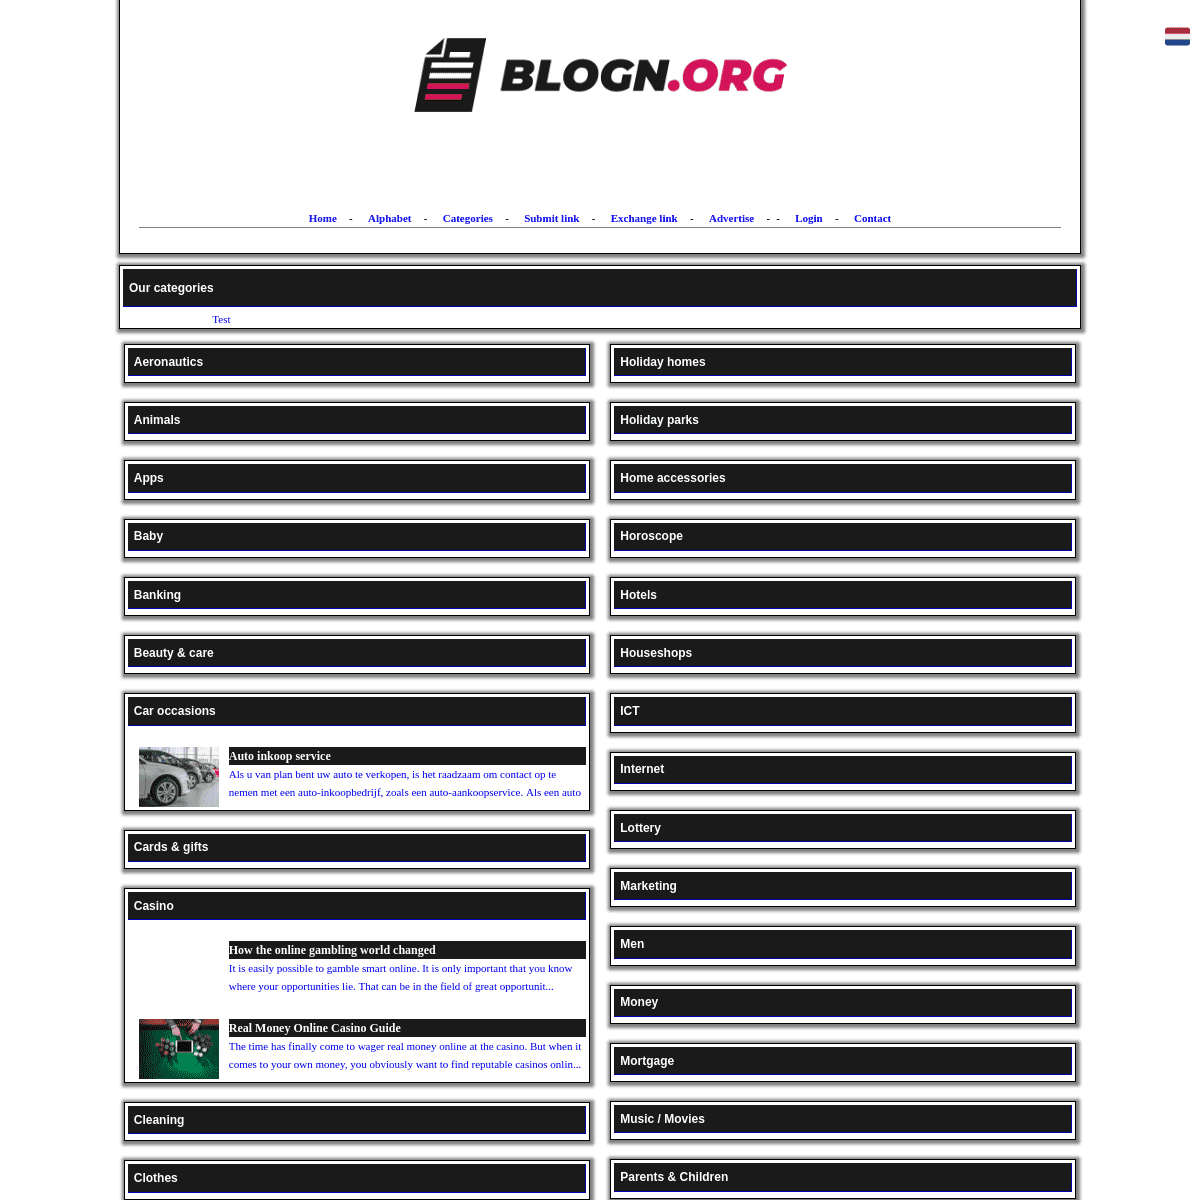 A complete backup of https://blogn.org